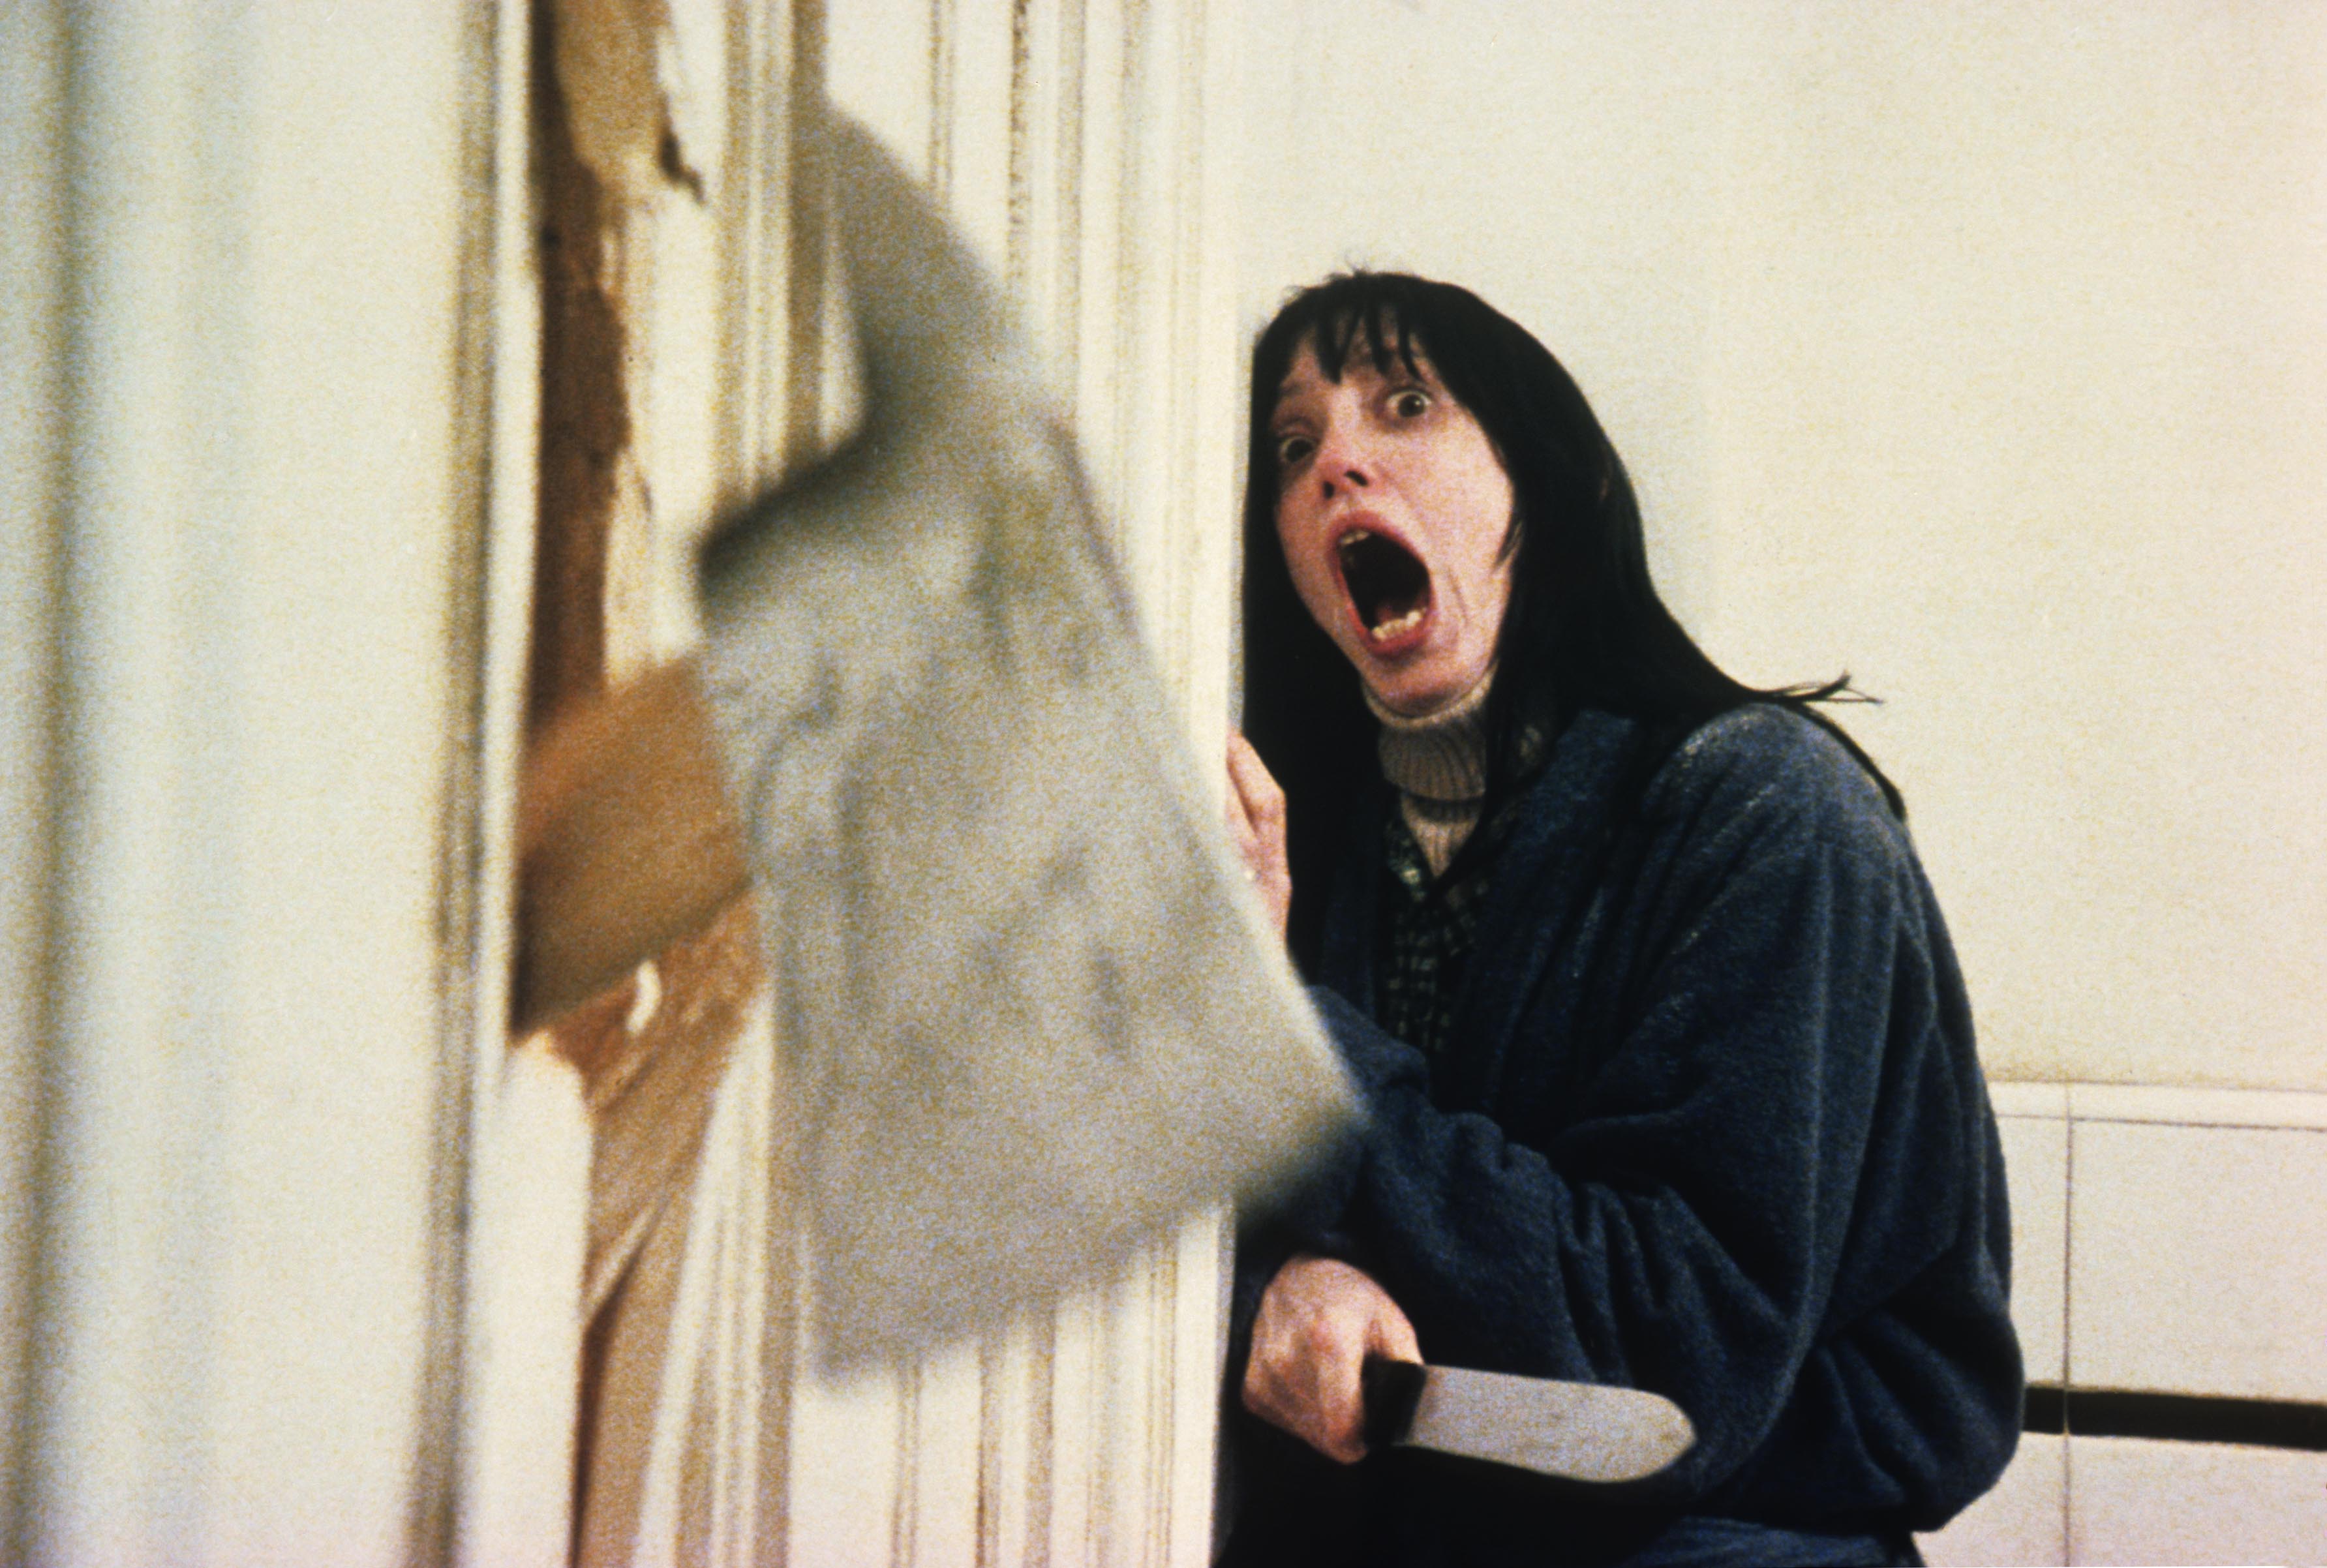 Duvall as Wendy Torrance in Stanley Kubrick’s ‘The Shining’ in 1980